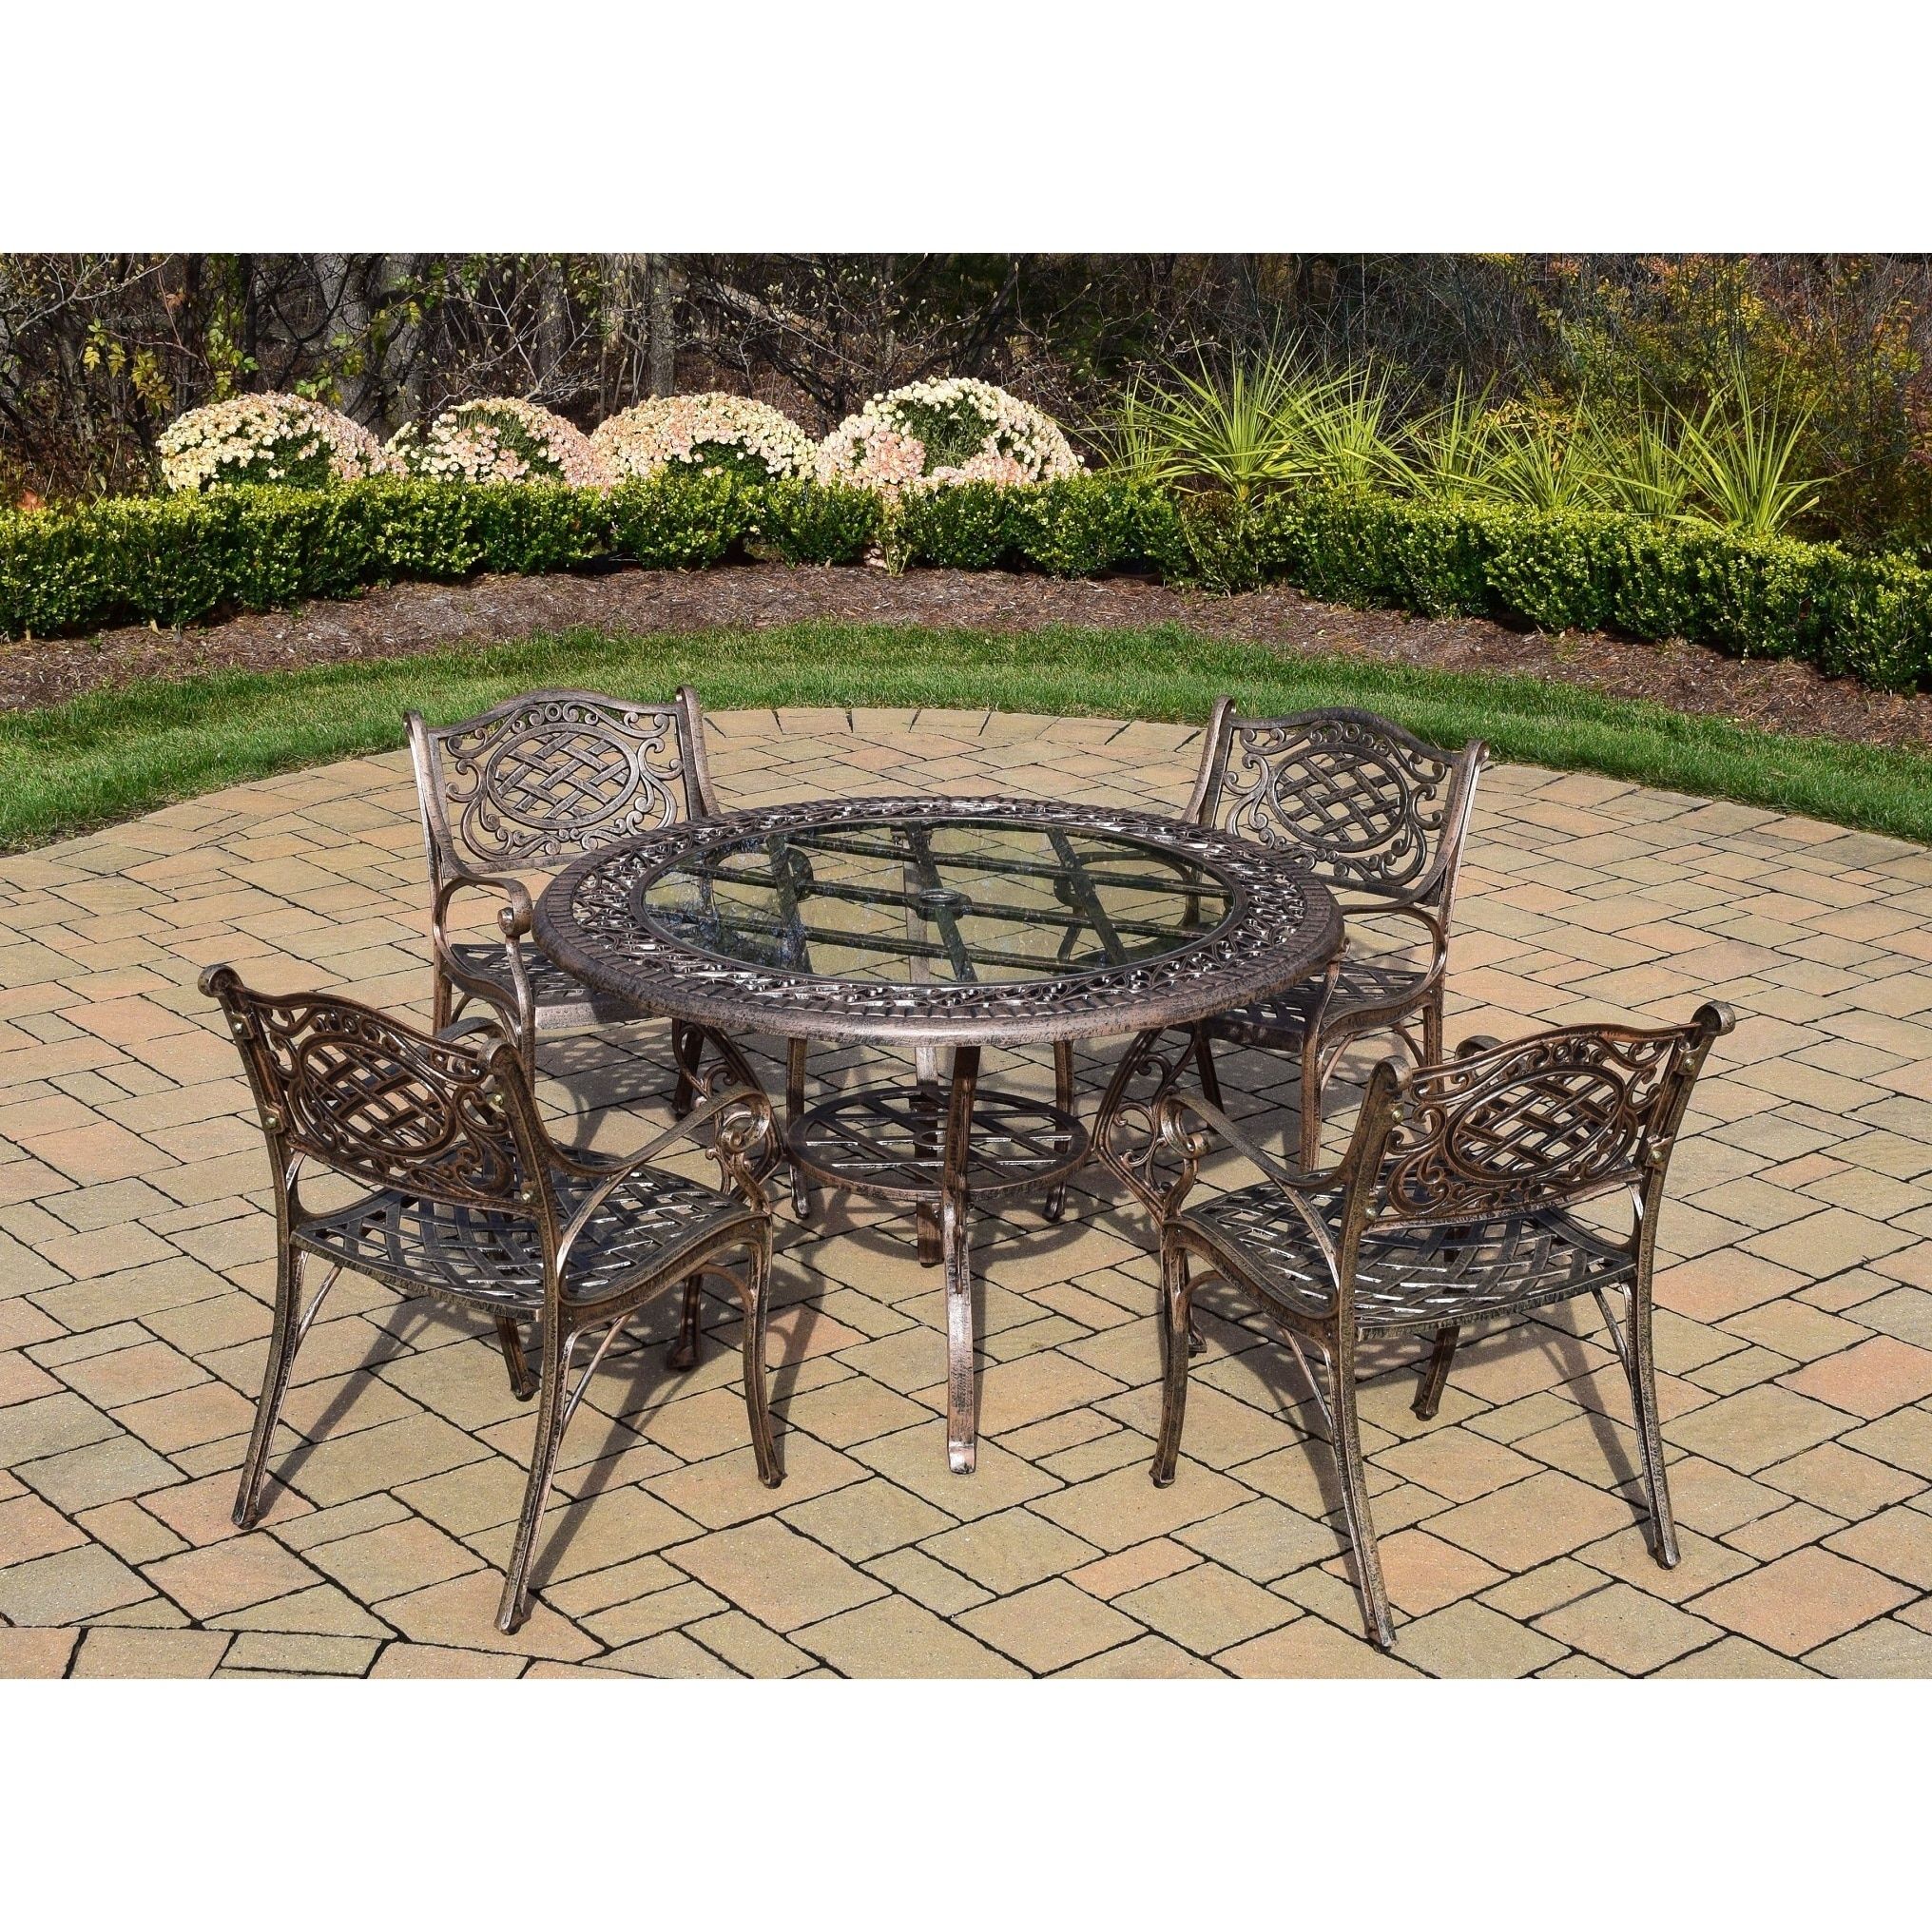 Oakland Living Corporation 5 Piece Patio Dining Set, With 48 Inch Round Within 5 Piece Round Patio Dining Sets (View 15 of 15)